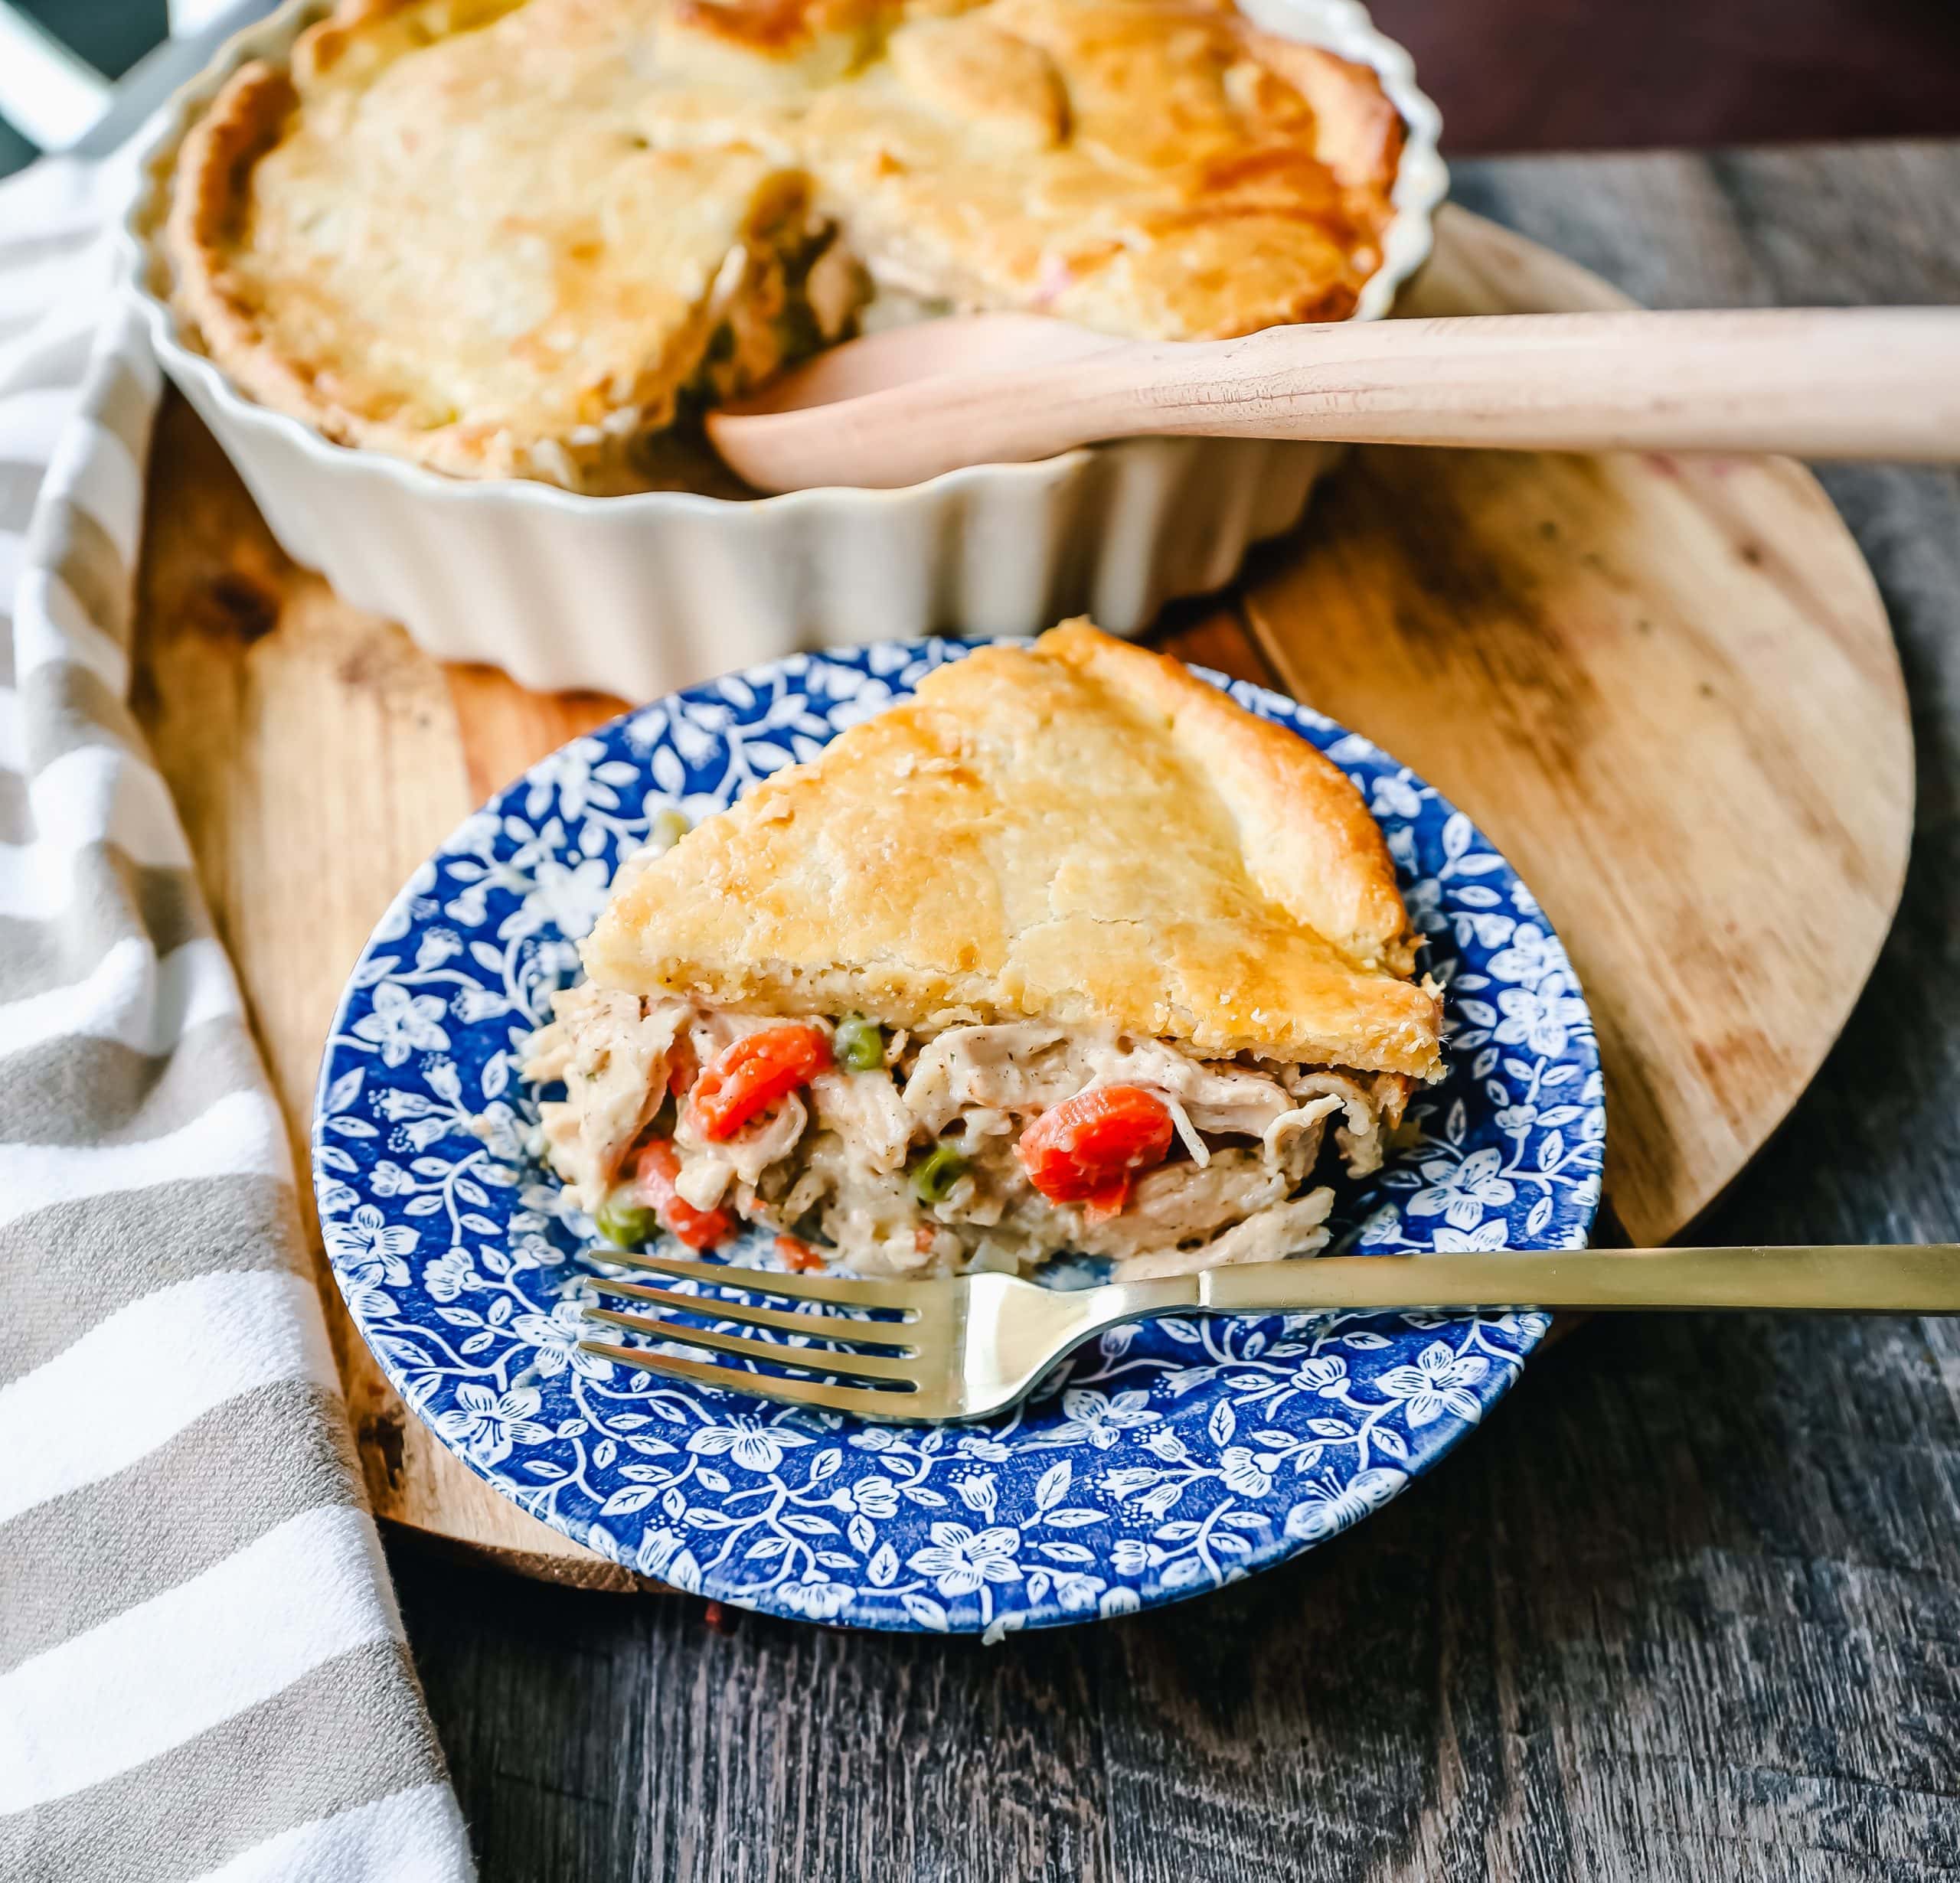 Chicken Pot Pie. Homemade Chicken Pot Pie made with a buttery, flaky homemade pie crust filled with a rich, creamy sauce filled with vegetables and tender chicken. The best comfort food dinner!